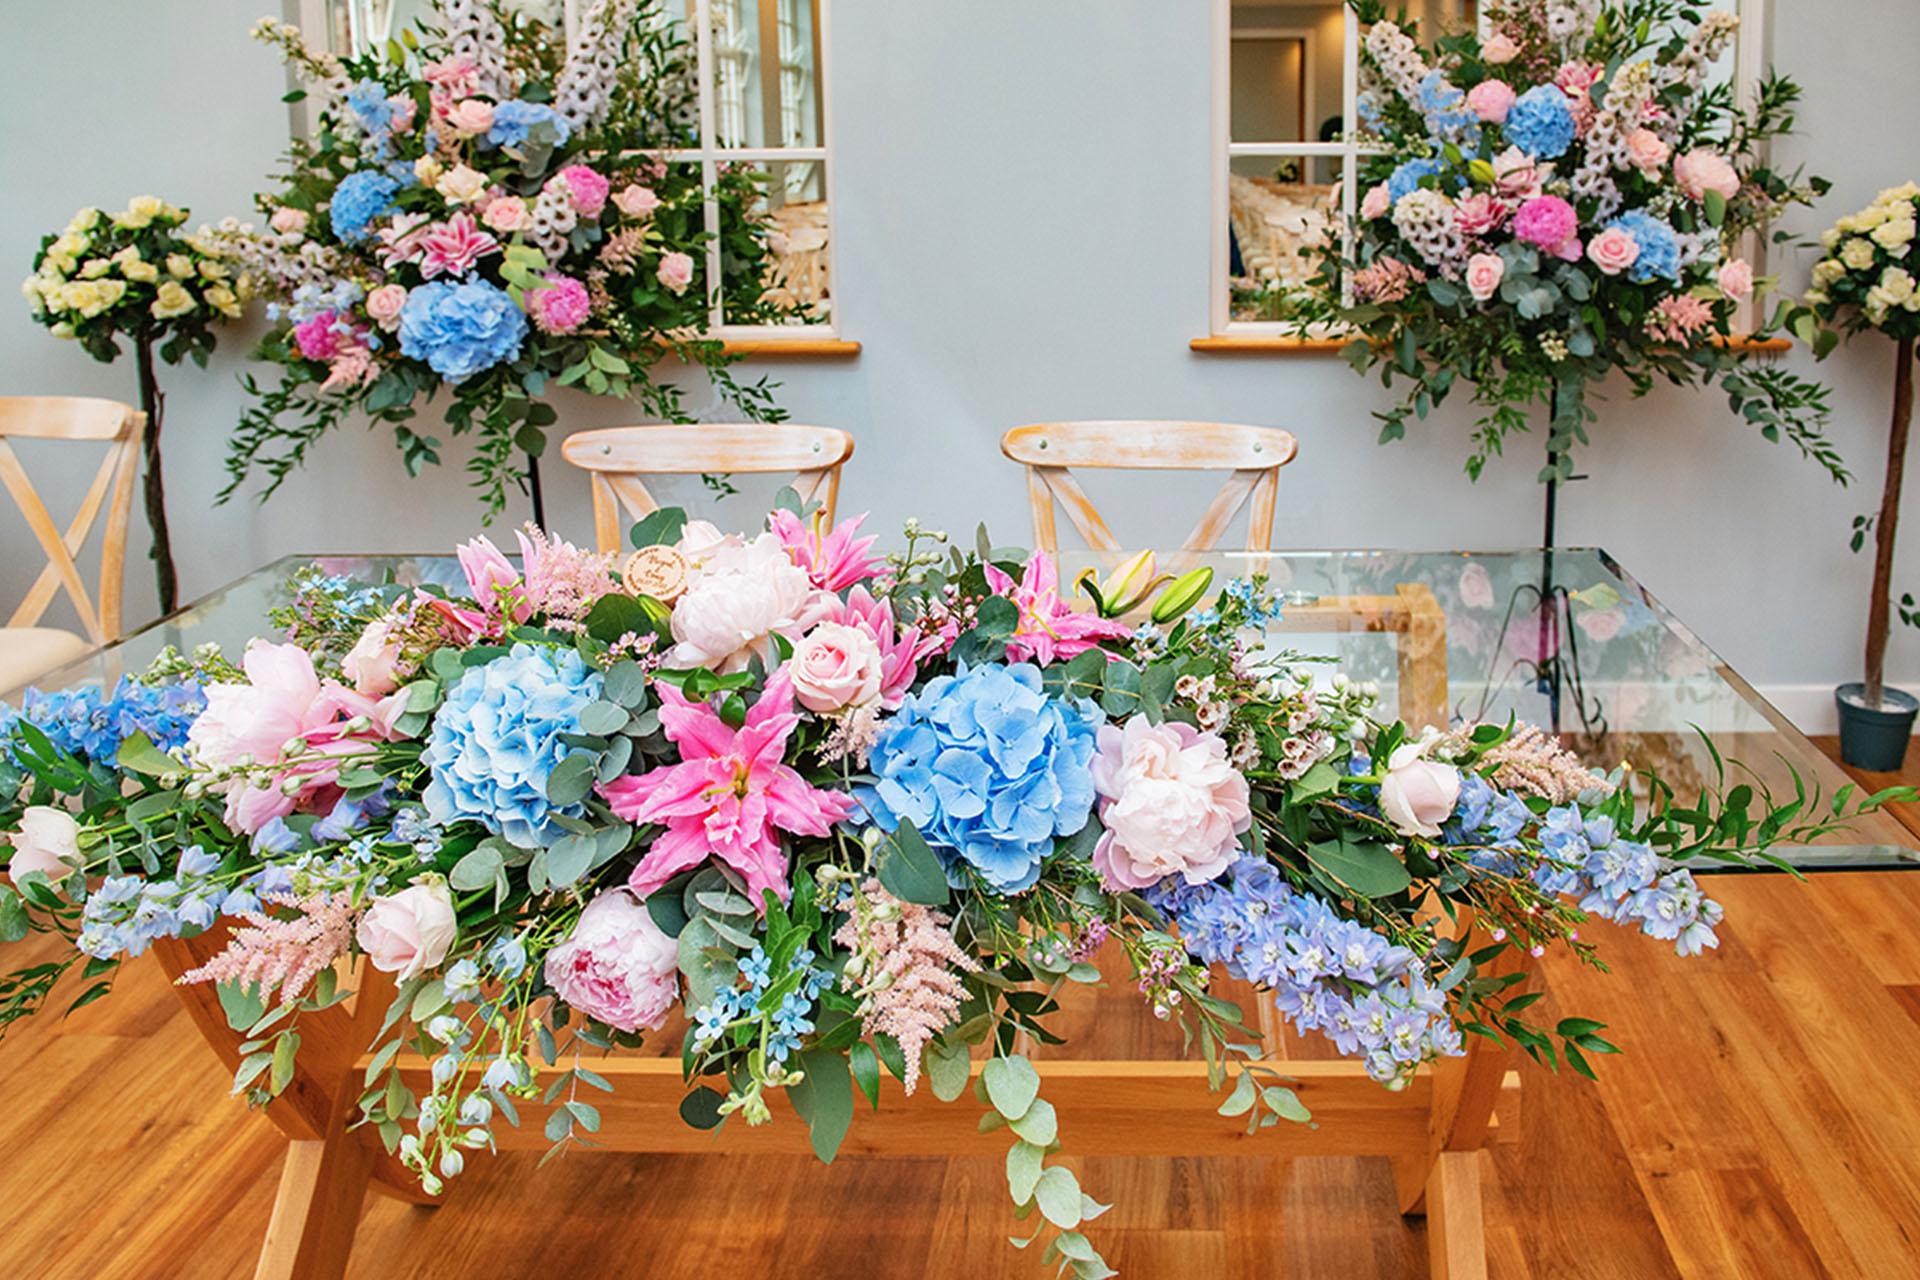 26 Wedding Table Decorating Ideas That Will Wow Your Guests!!